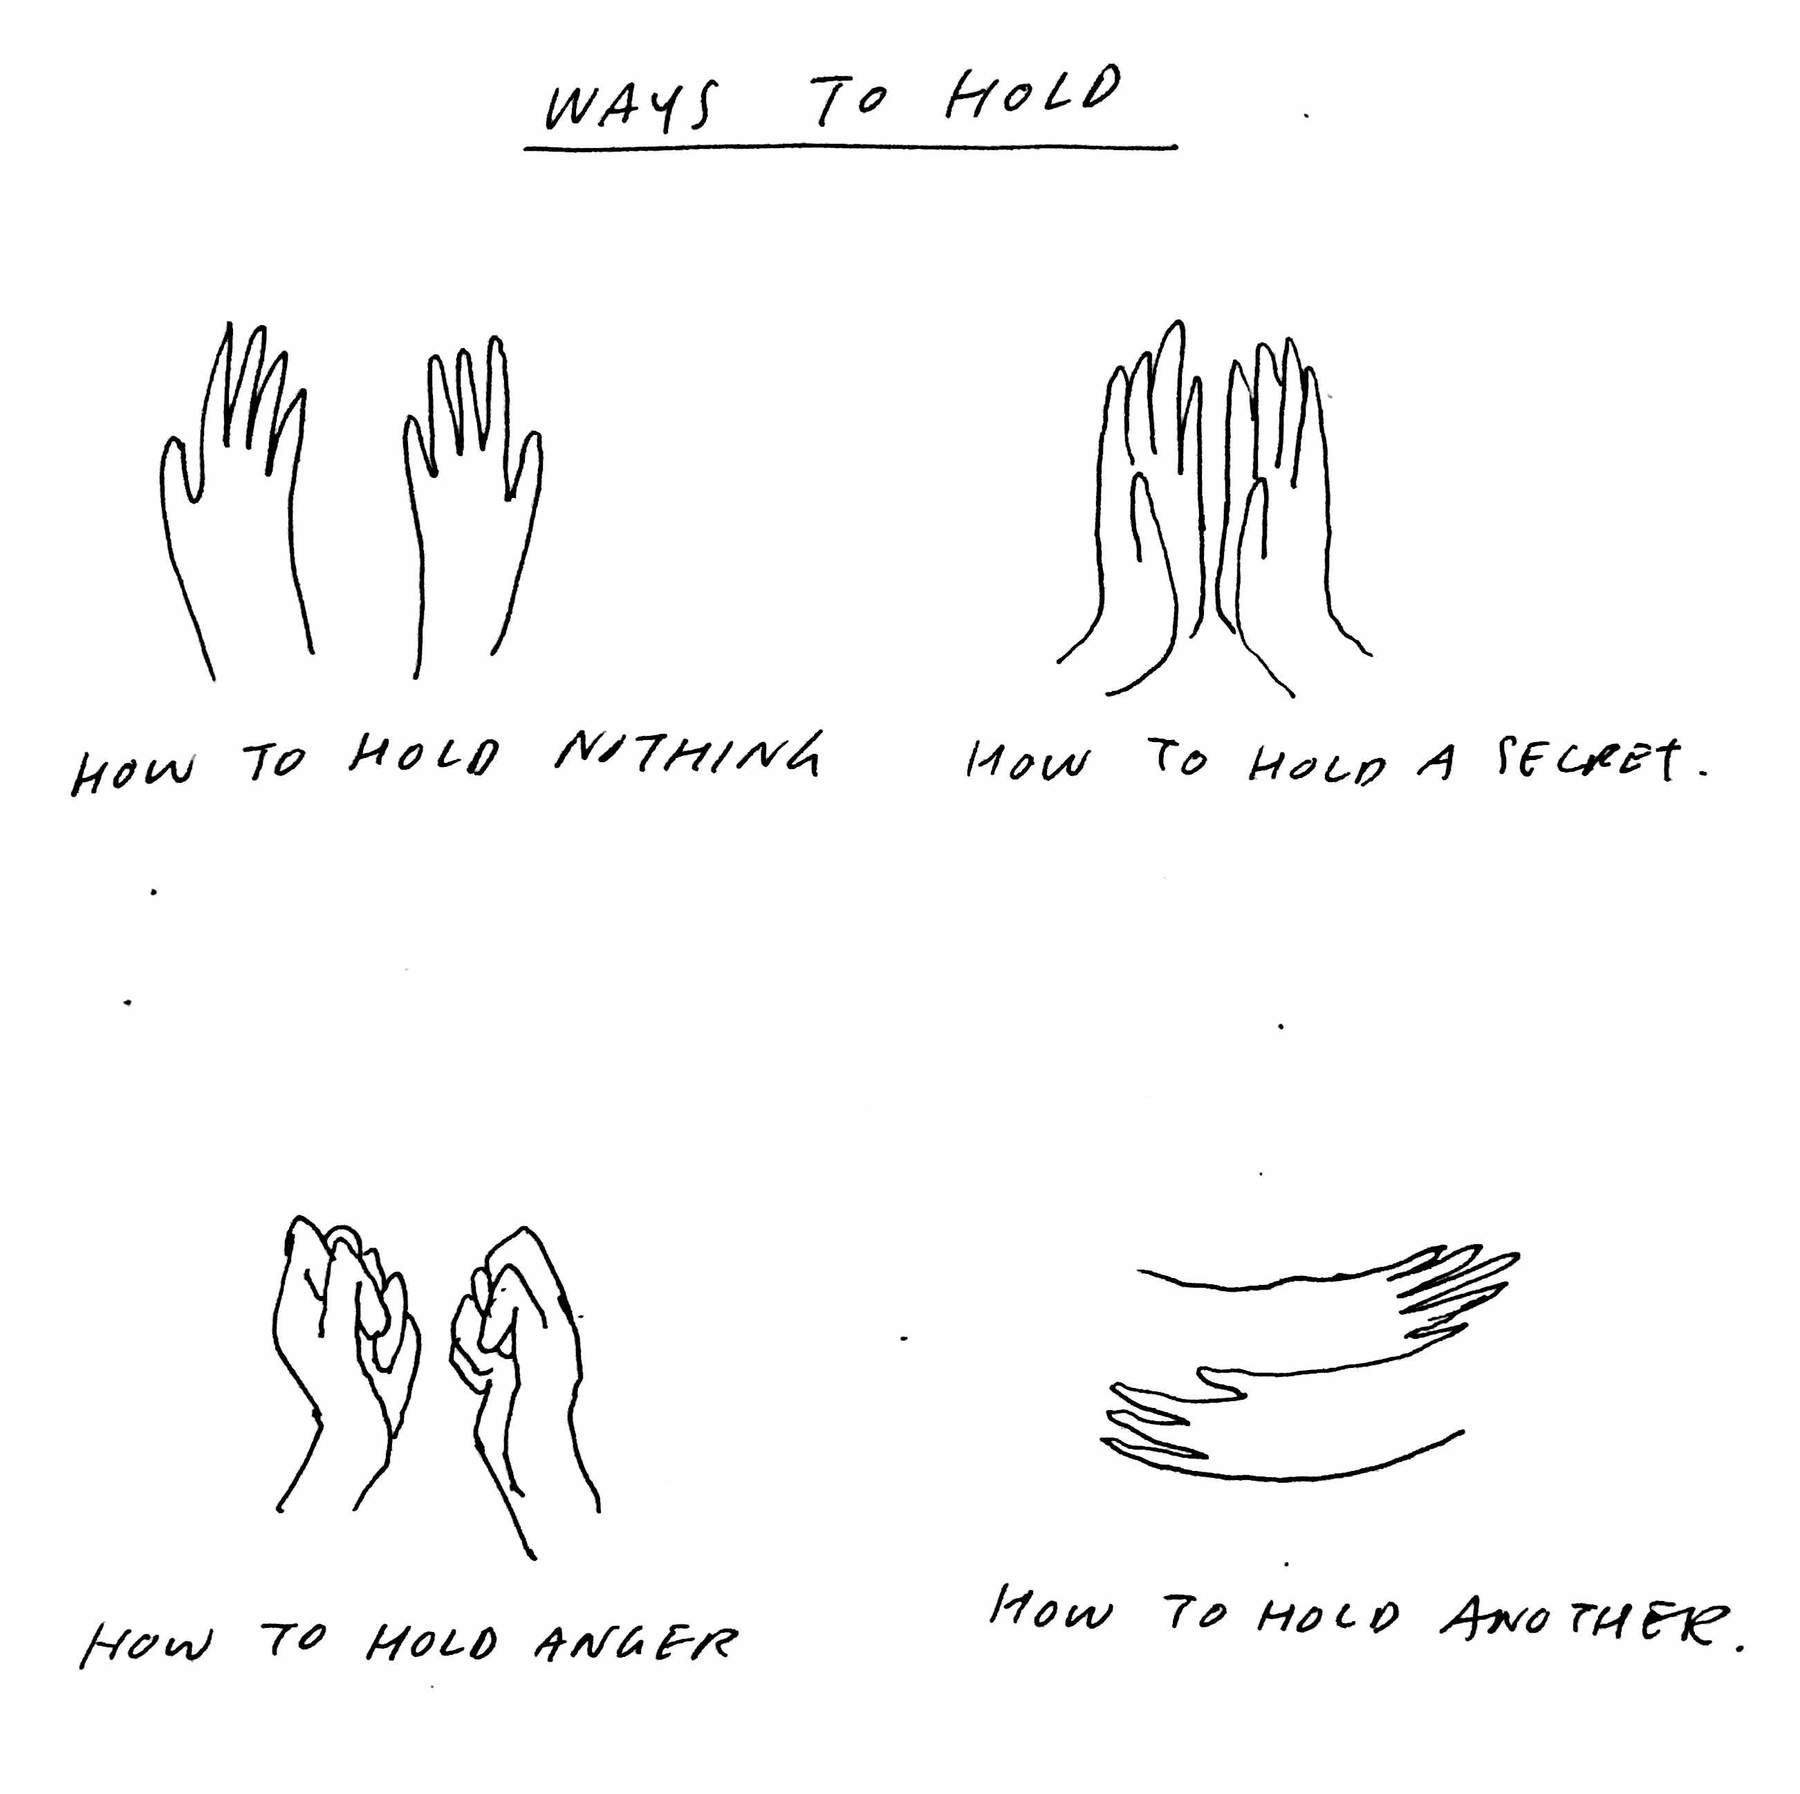 Ways to hold